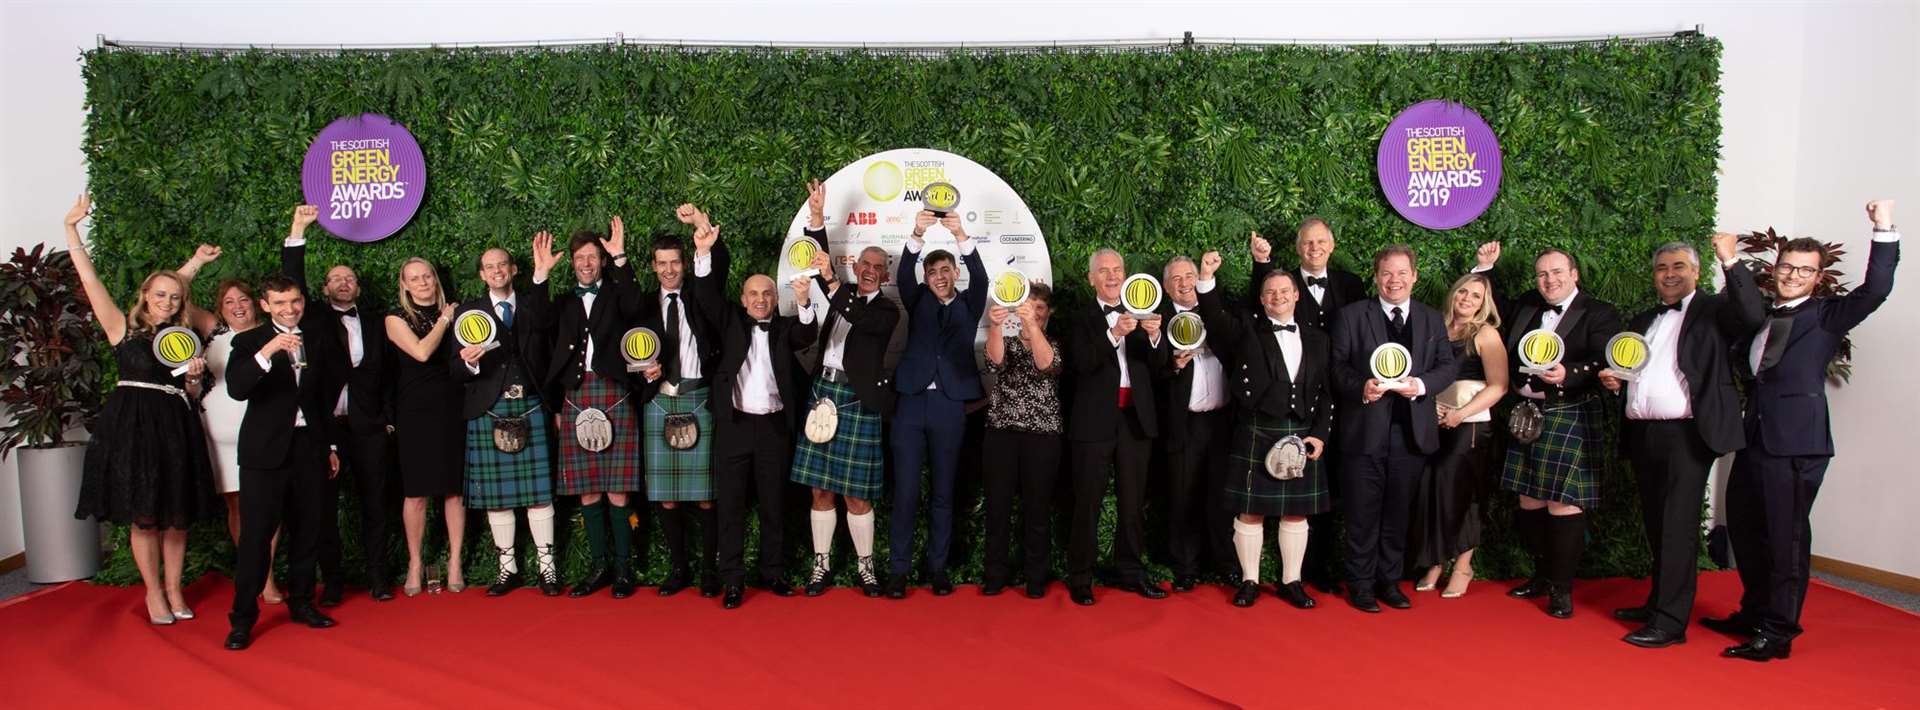 All the winners at the 2019 Scottish Green Energy Awards held at the Edinburgh International Conference Centre on December 5.